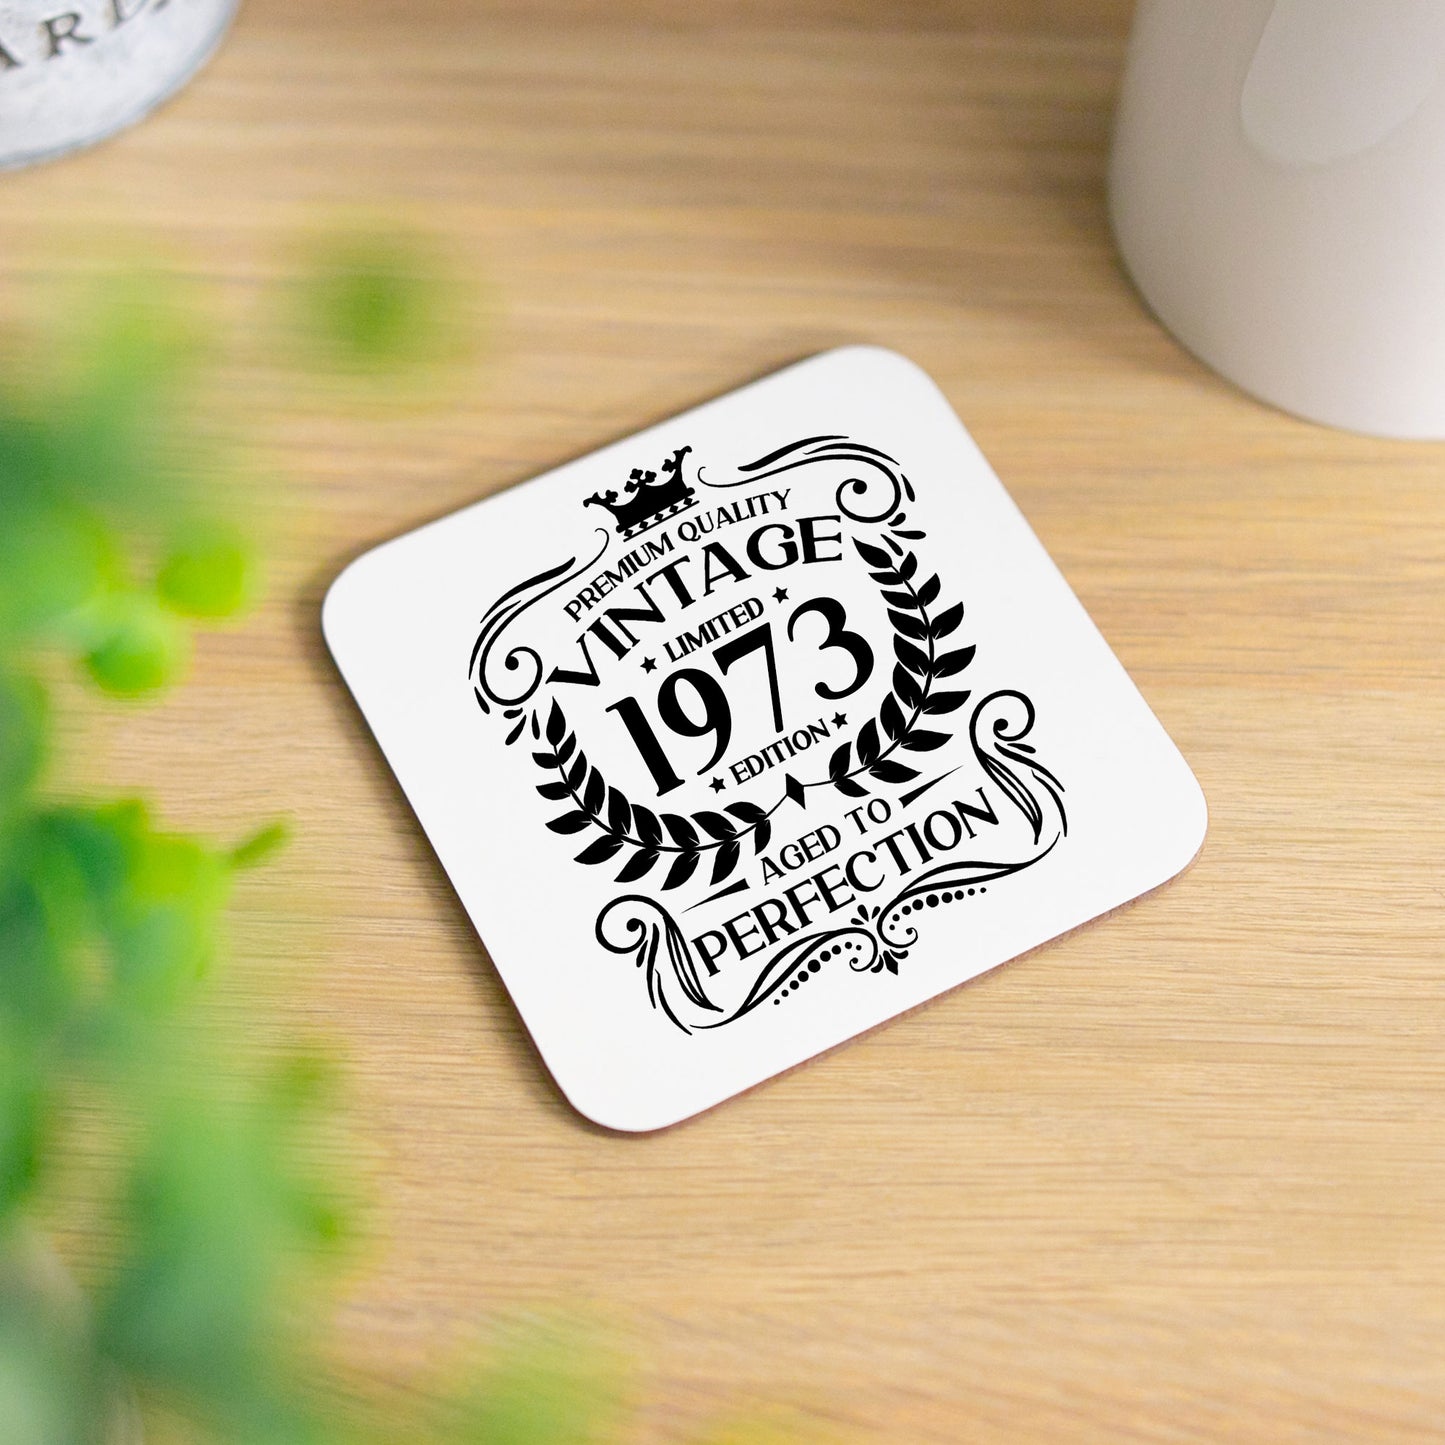 Vintage 1973 50th Birthday Engraved Wine Glass Gift  - Always Looking Good - Glass & Printed Coaster  